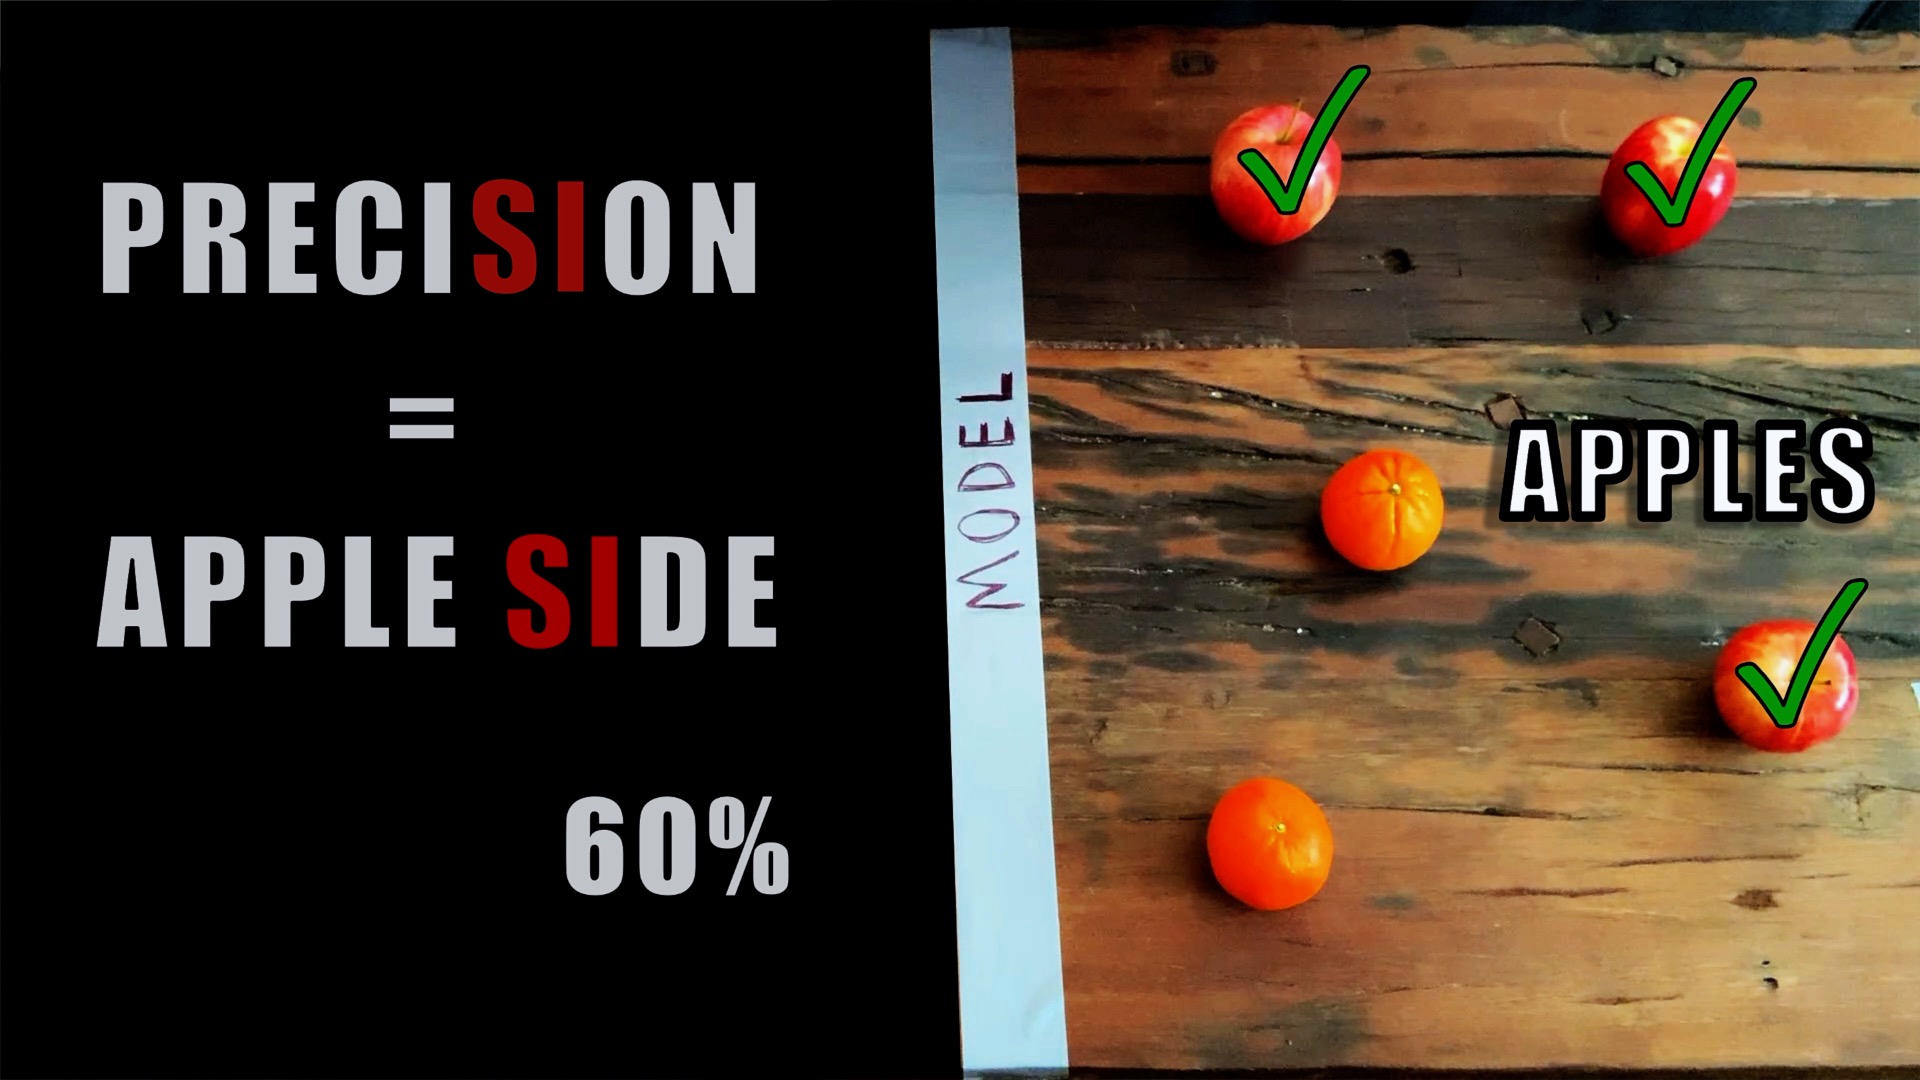 Precision calculated as 60% for the apple class from example apple-orange model